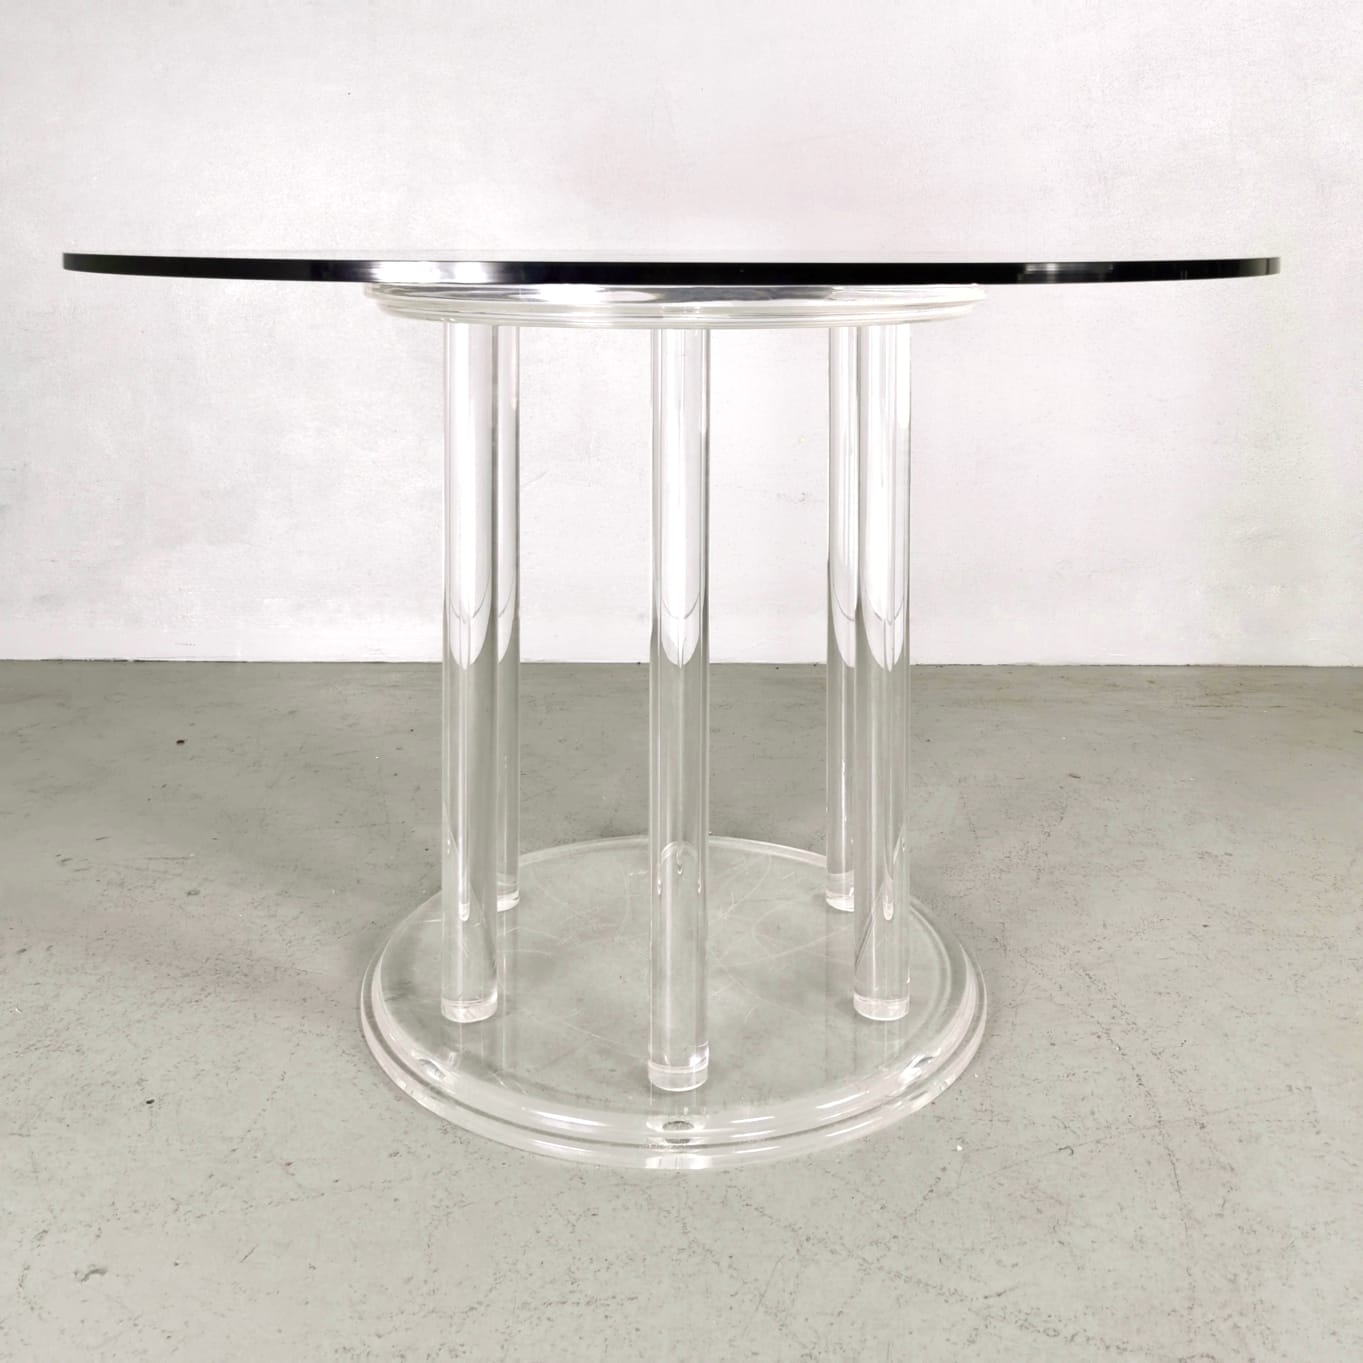 Round Plexi and glass table from the 80s